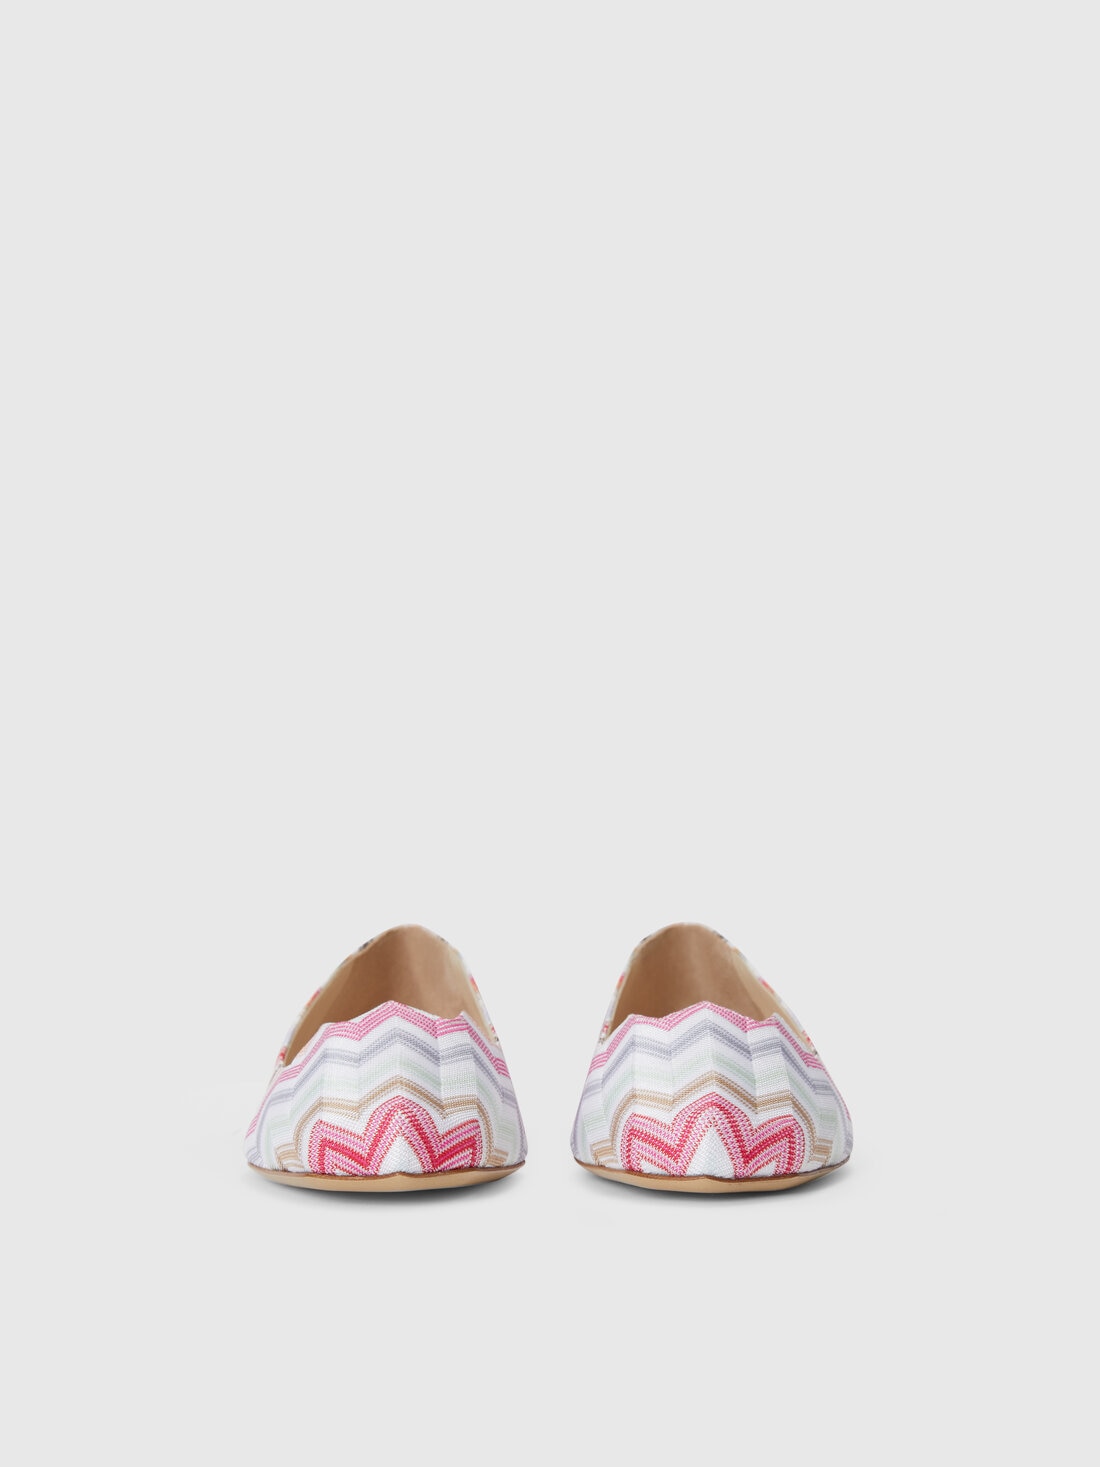 Ballerinas in chevron fabric, Pink   - LS24SY04BV00FYS30DR - 2